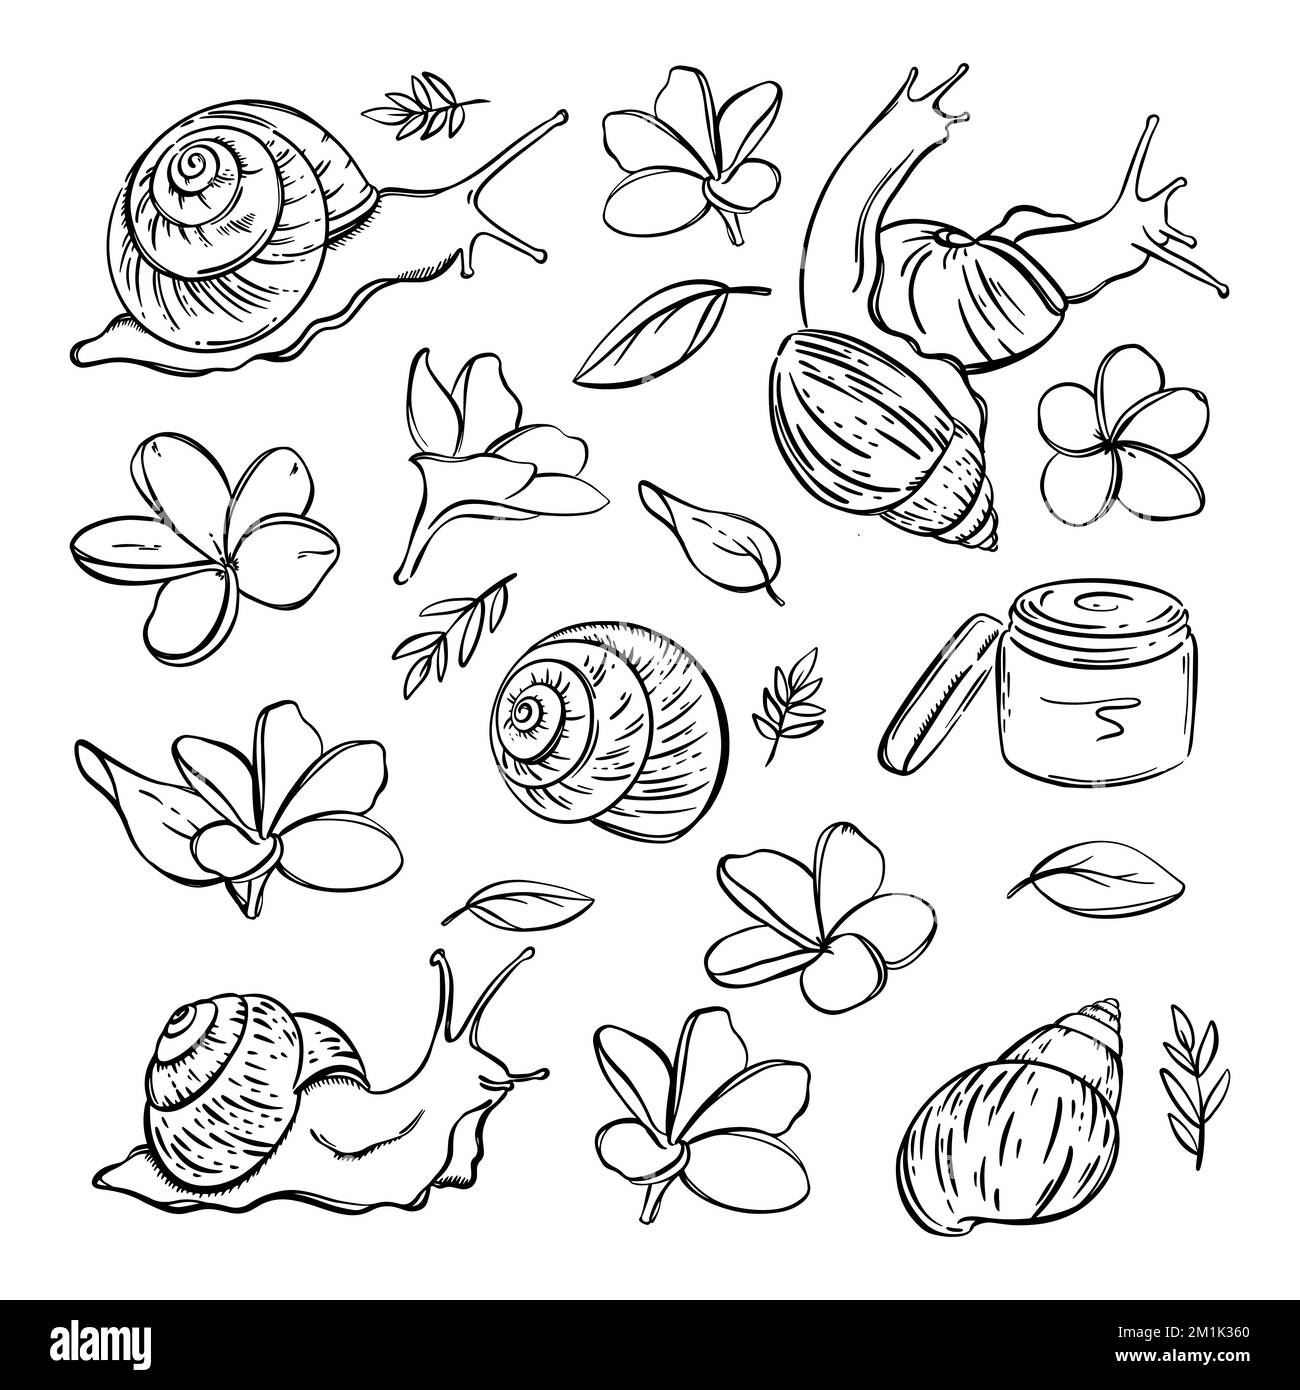 SNAIL COSMETICS MONOCHROME Various Gastropoda And Mucin Organic Preparations For Health And Beauty Flowers Pharmaceutical Sketch Hand Drawn Element Se Stock Vector